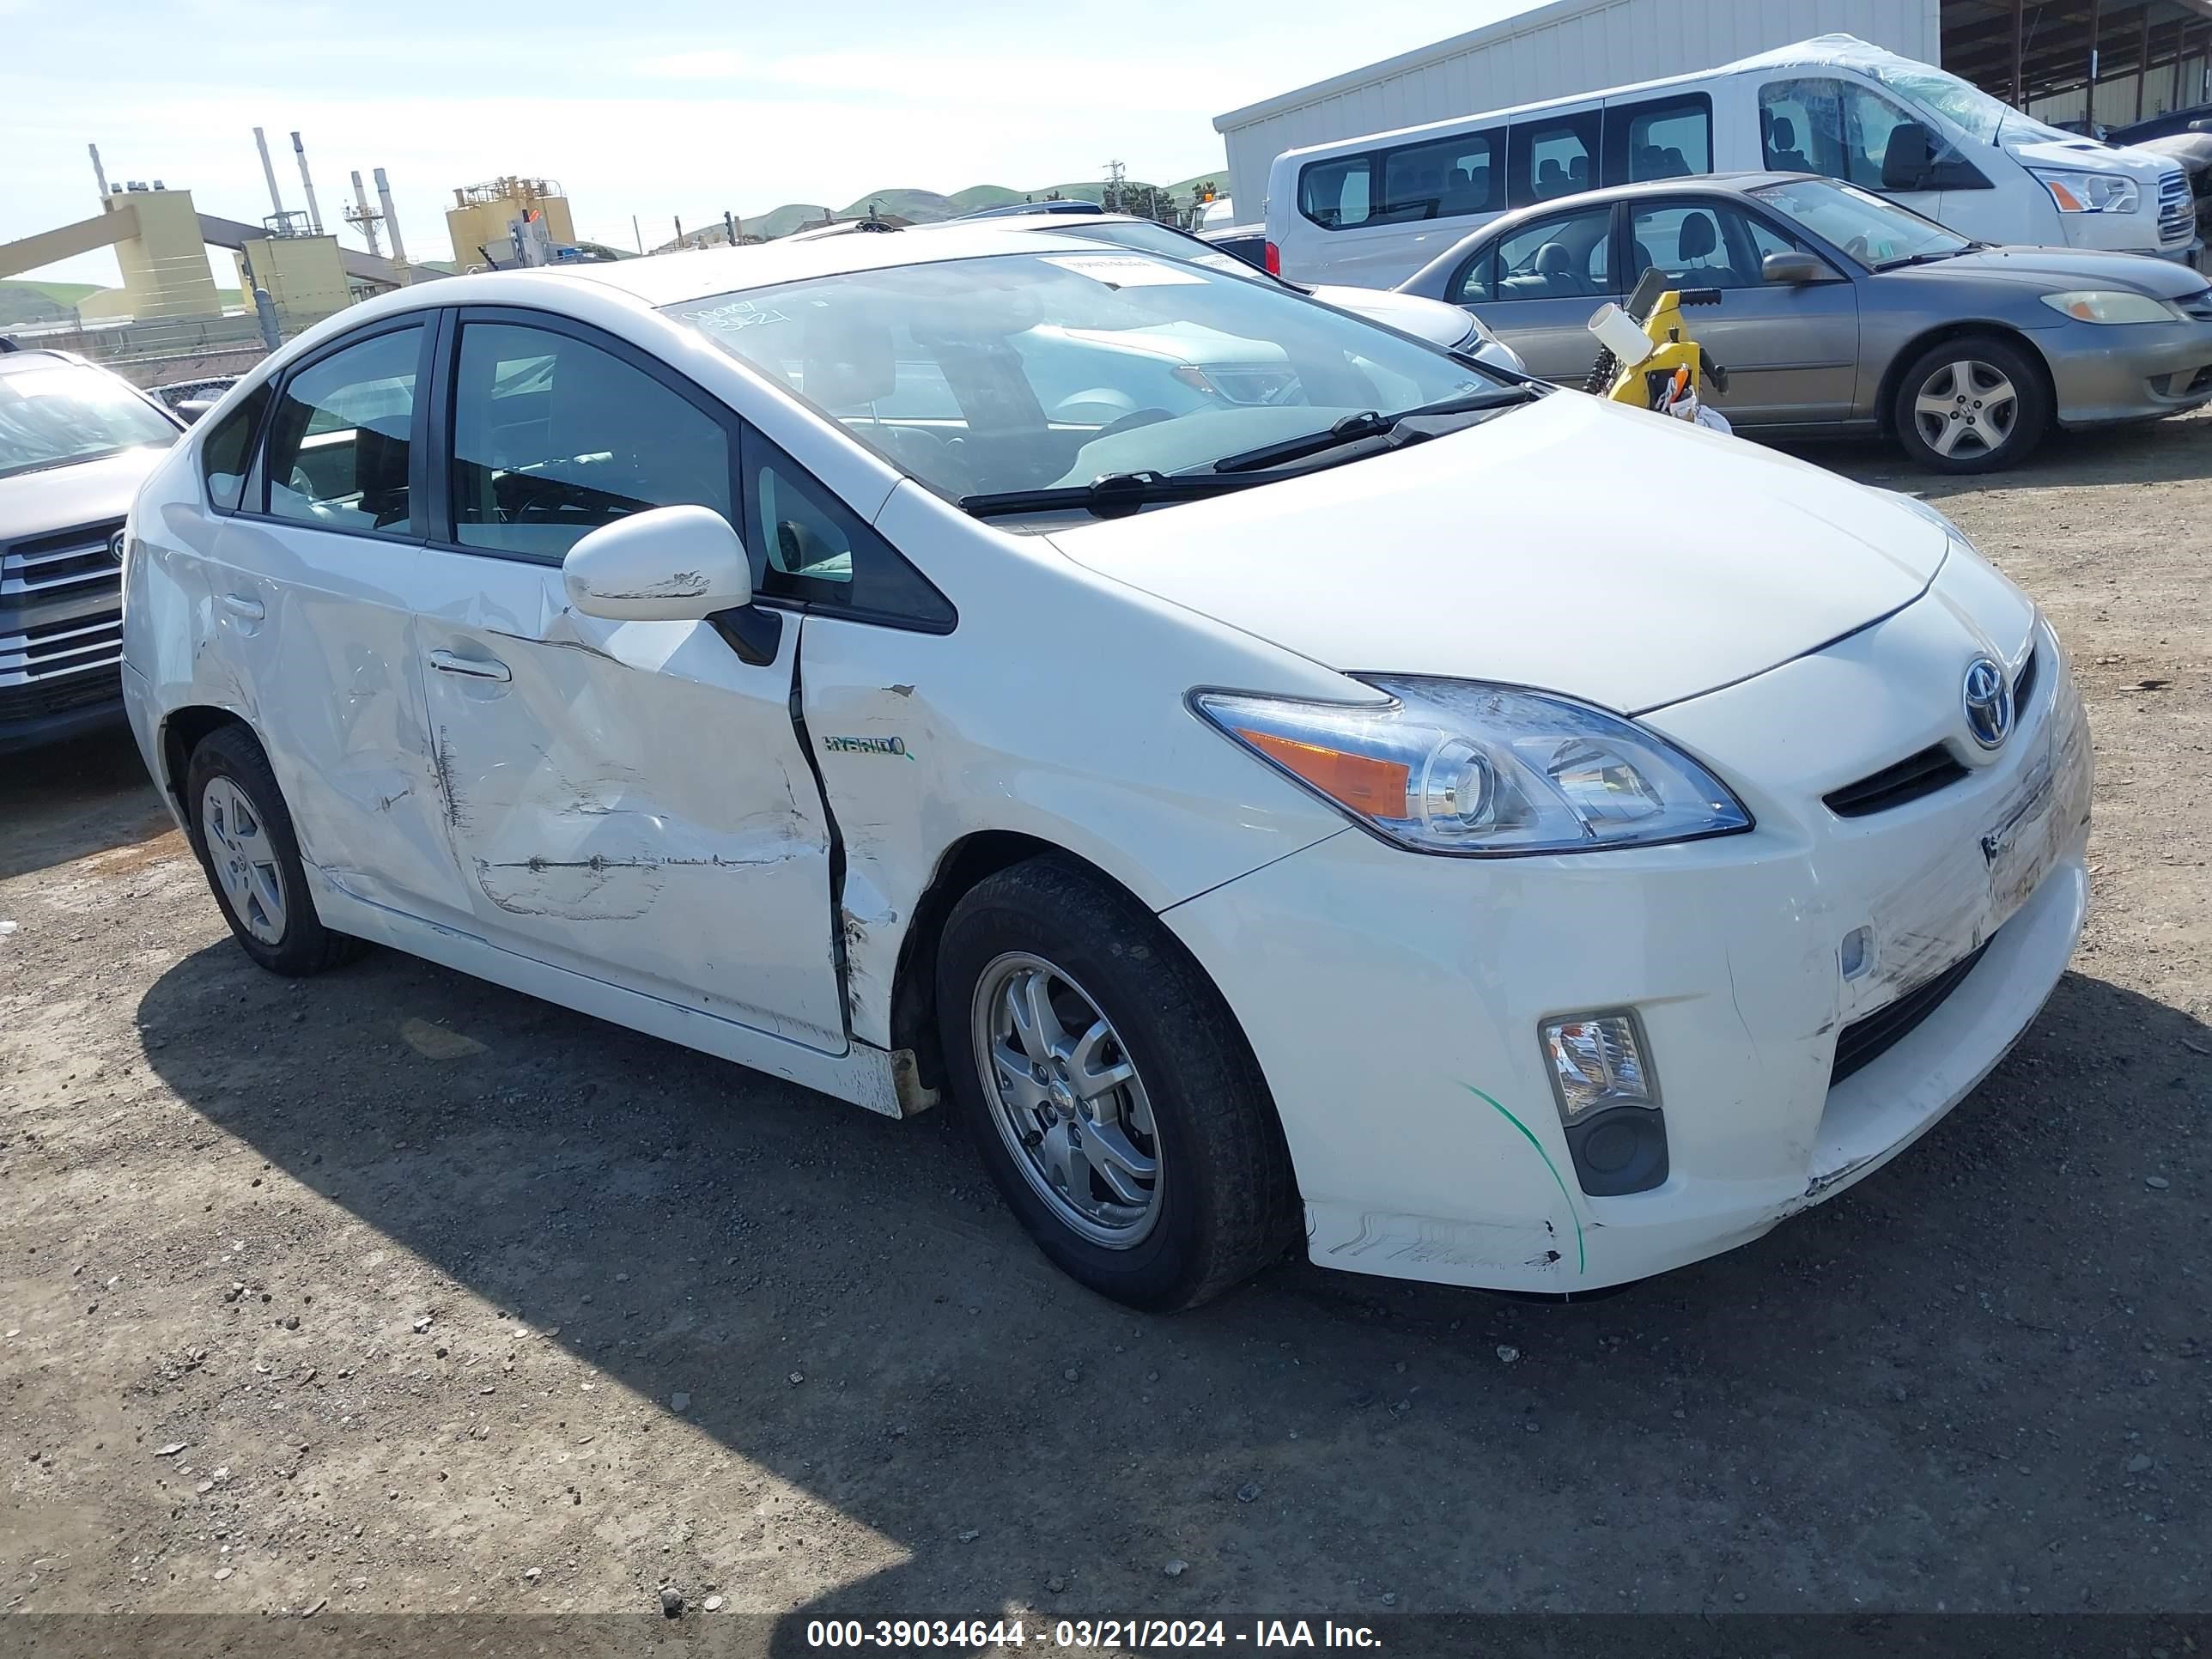 vin: JTDKN3DU7A0001074 JTDKN3DU7A0001074 2010 toyota prius 1800 for Sale in 94565, 2780 Willow Pass Road, Bay Point, USA